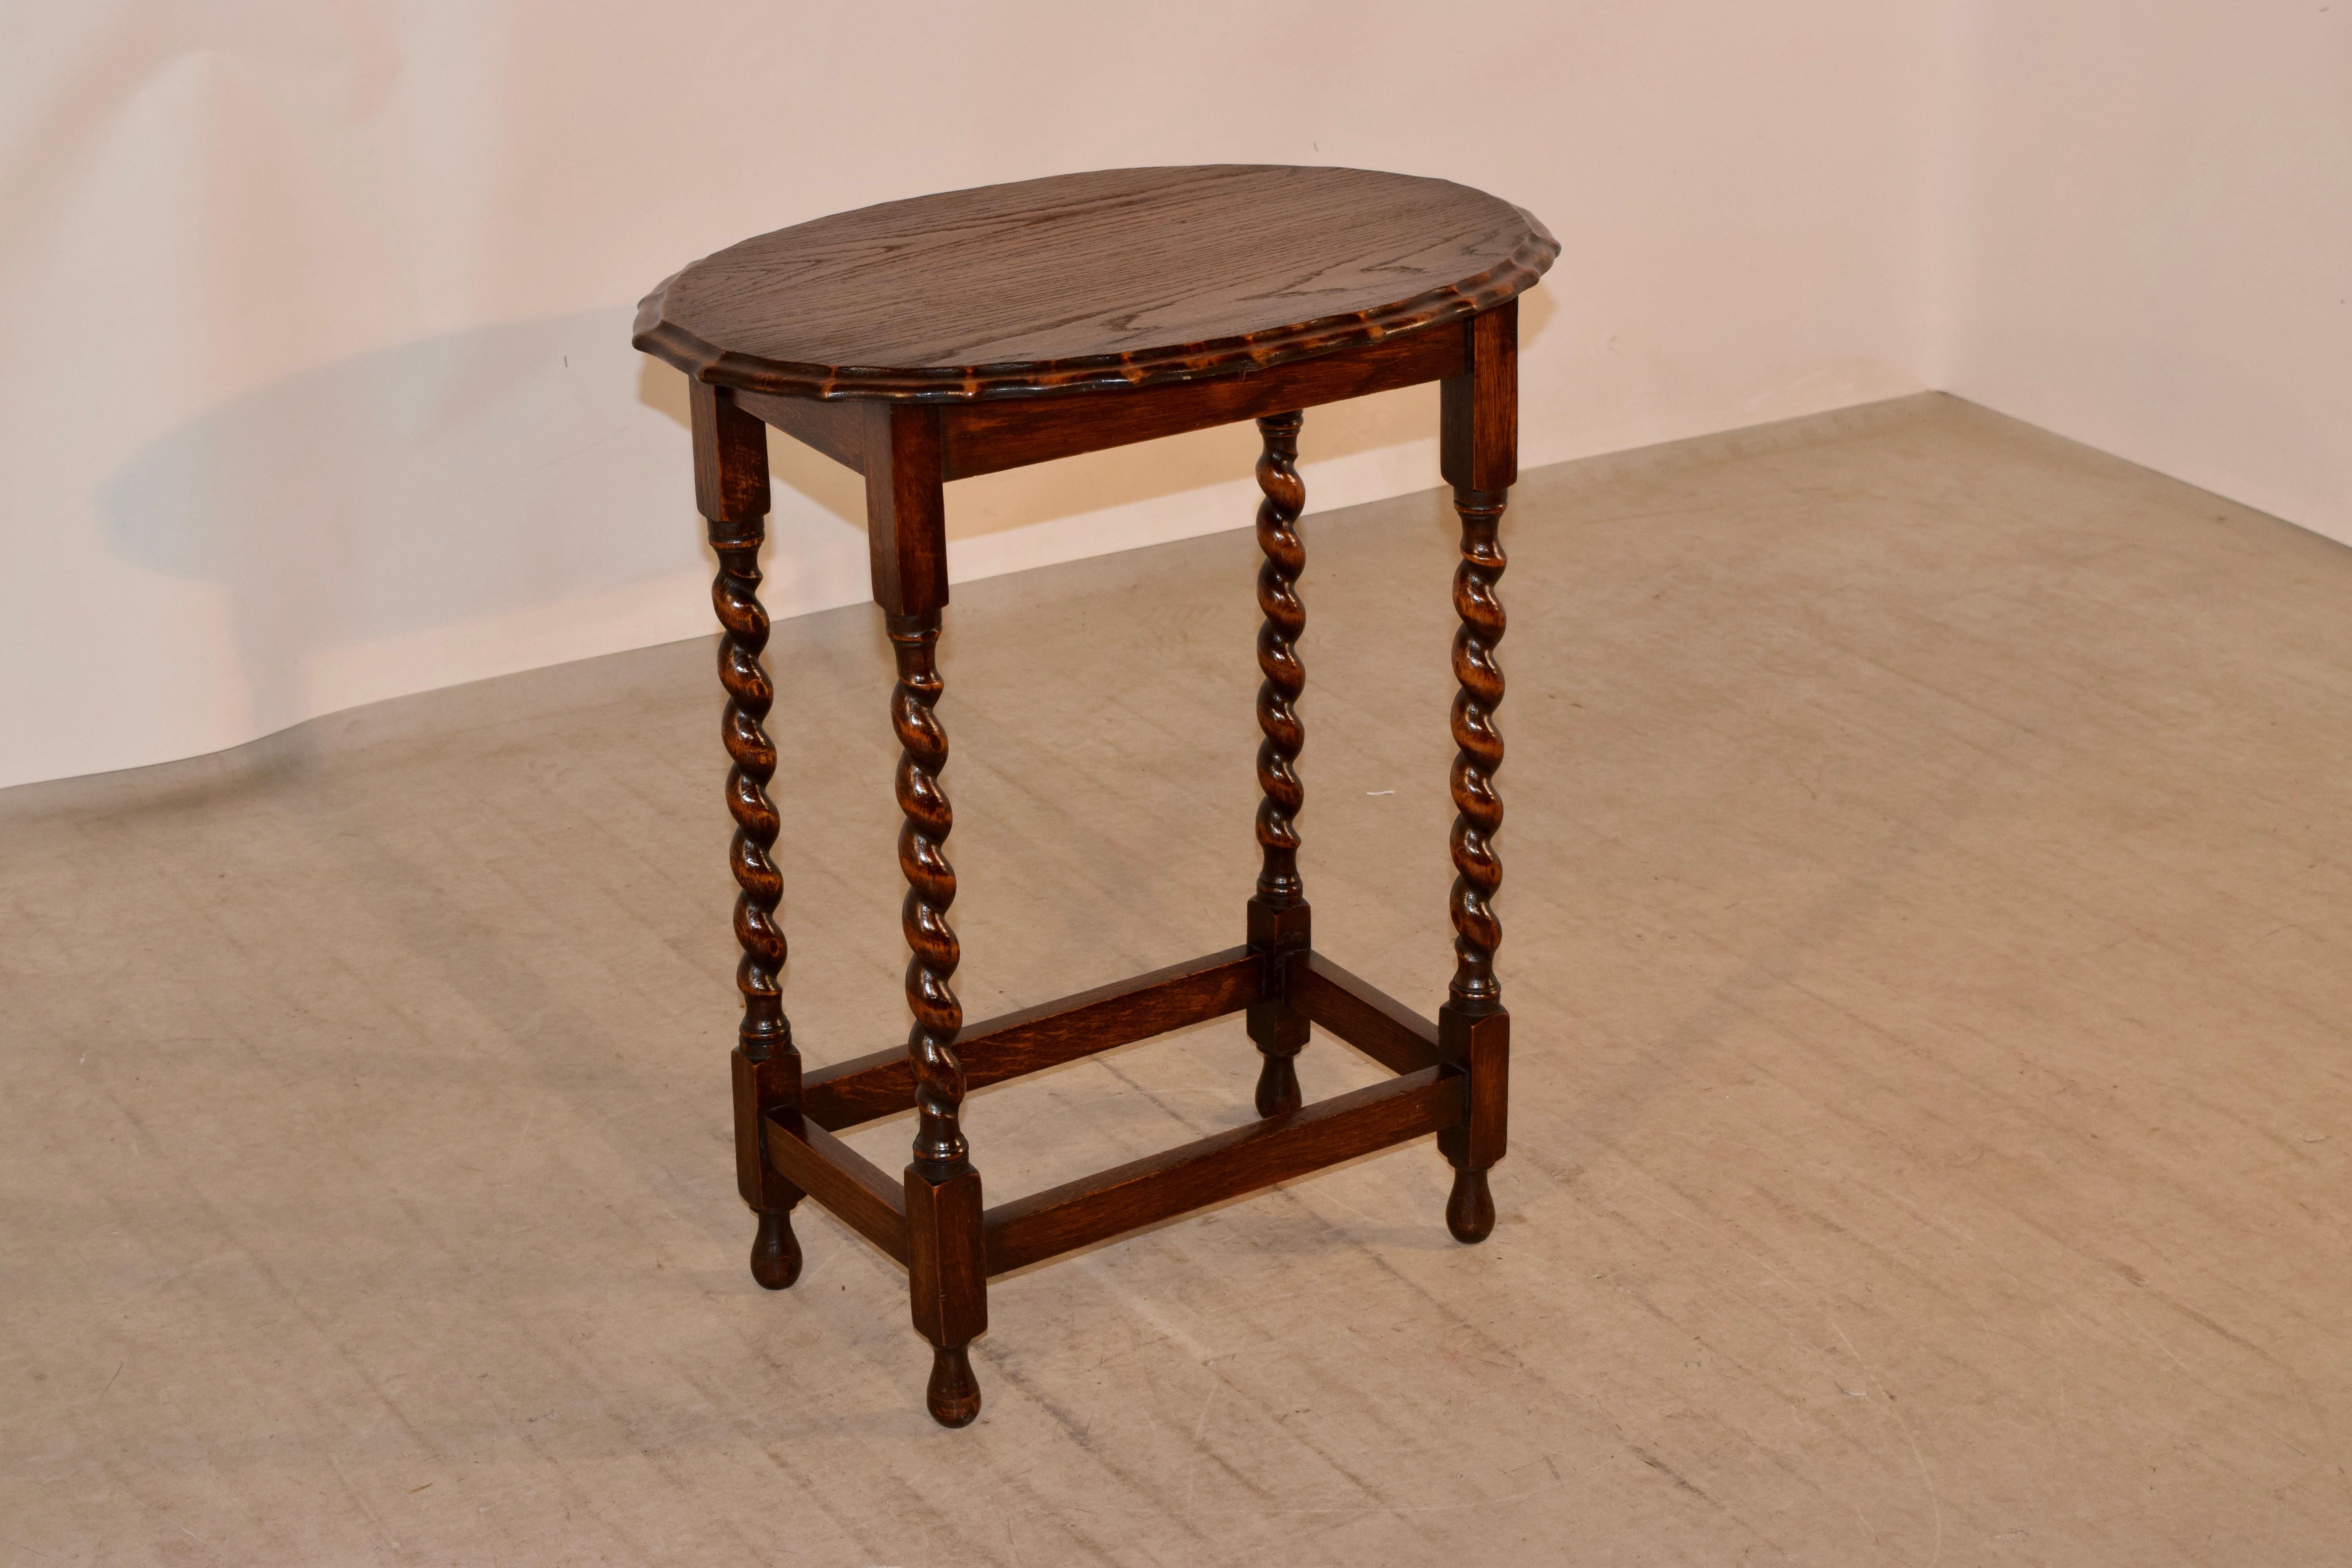 English oak occasional table with a scalloped and beveled edge around the top, following down to simple aprons and supported on hand-turned barley twist legs, joined by simple stretchers and raised on hand-turned tulip shaped feet.